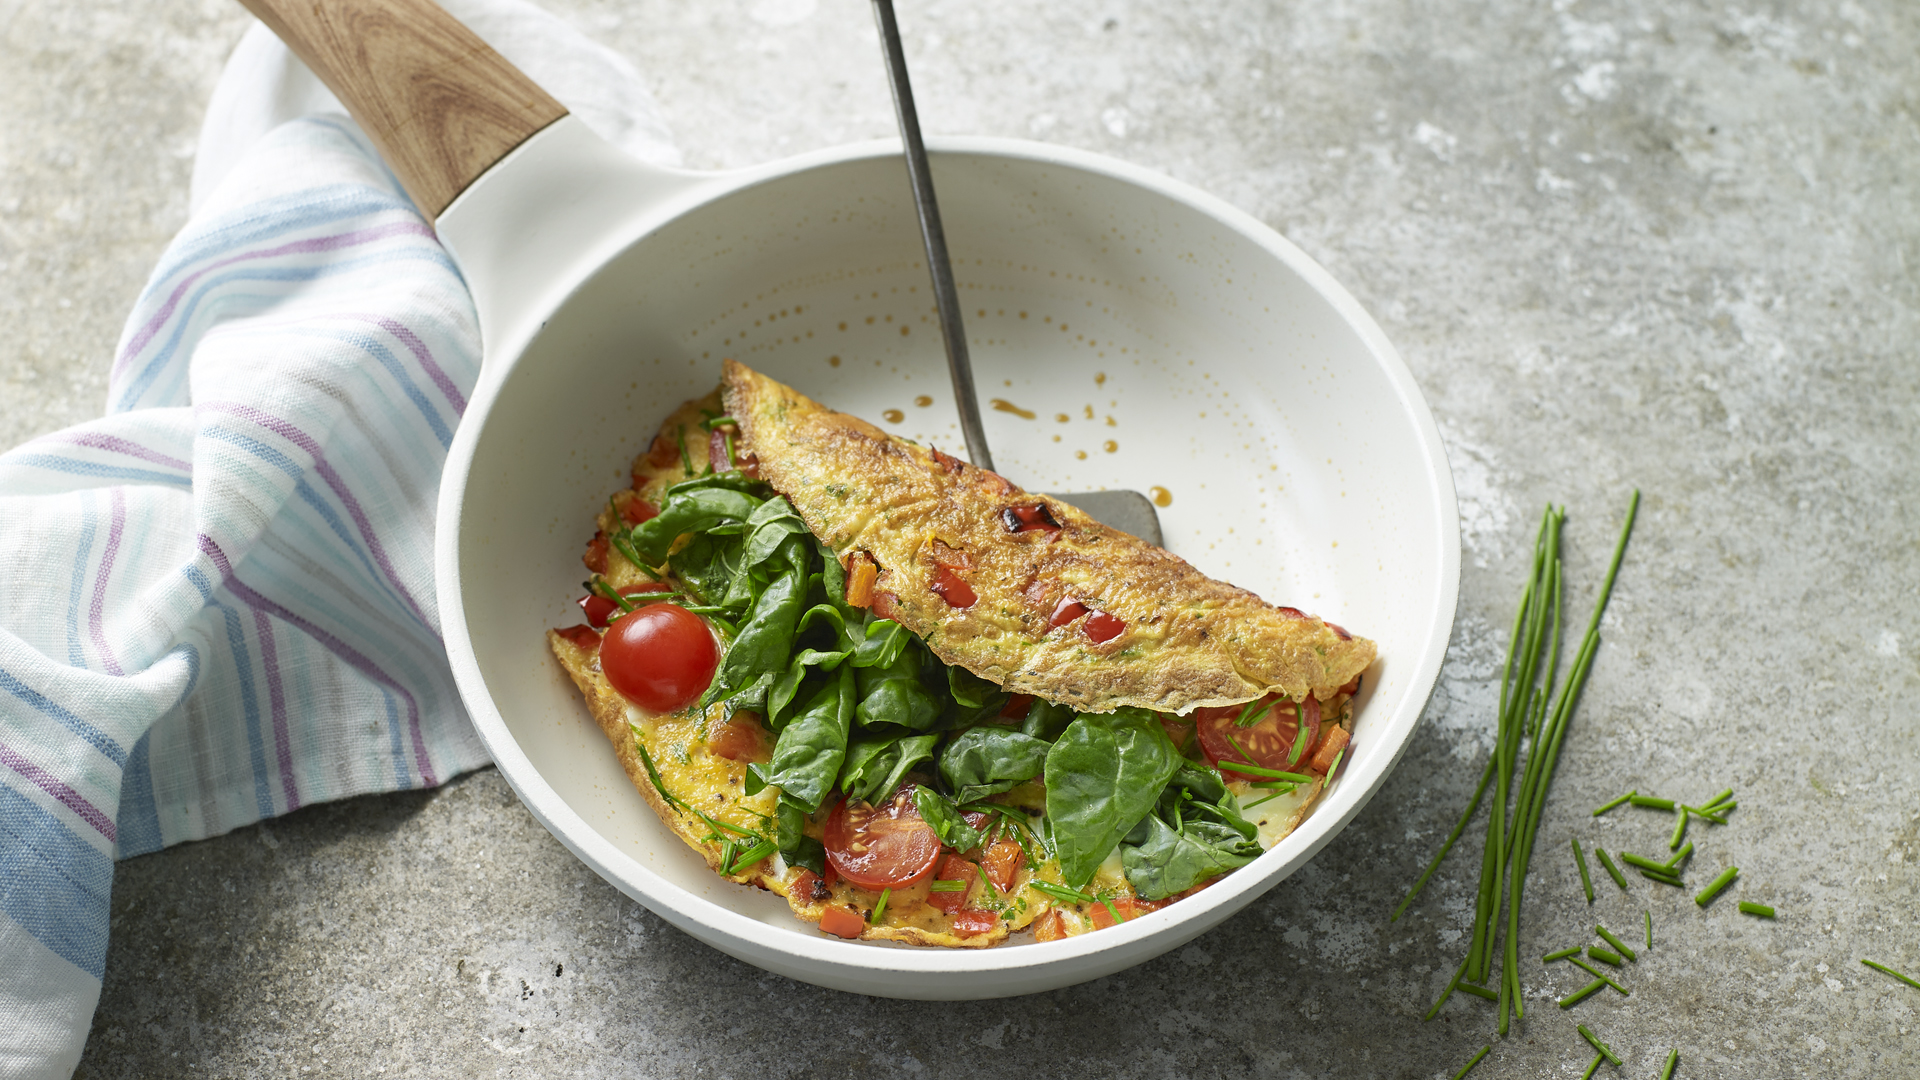 https://food-images.files.bbci.co.uk/food/recipes/healthy_omelette_64122_16x9.jpg